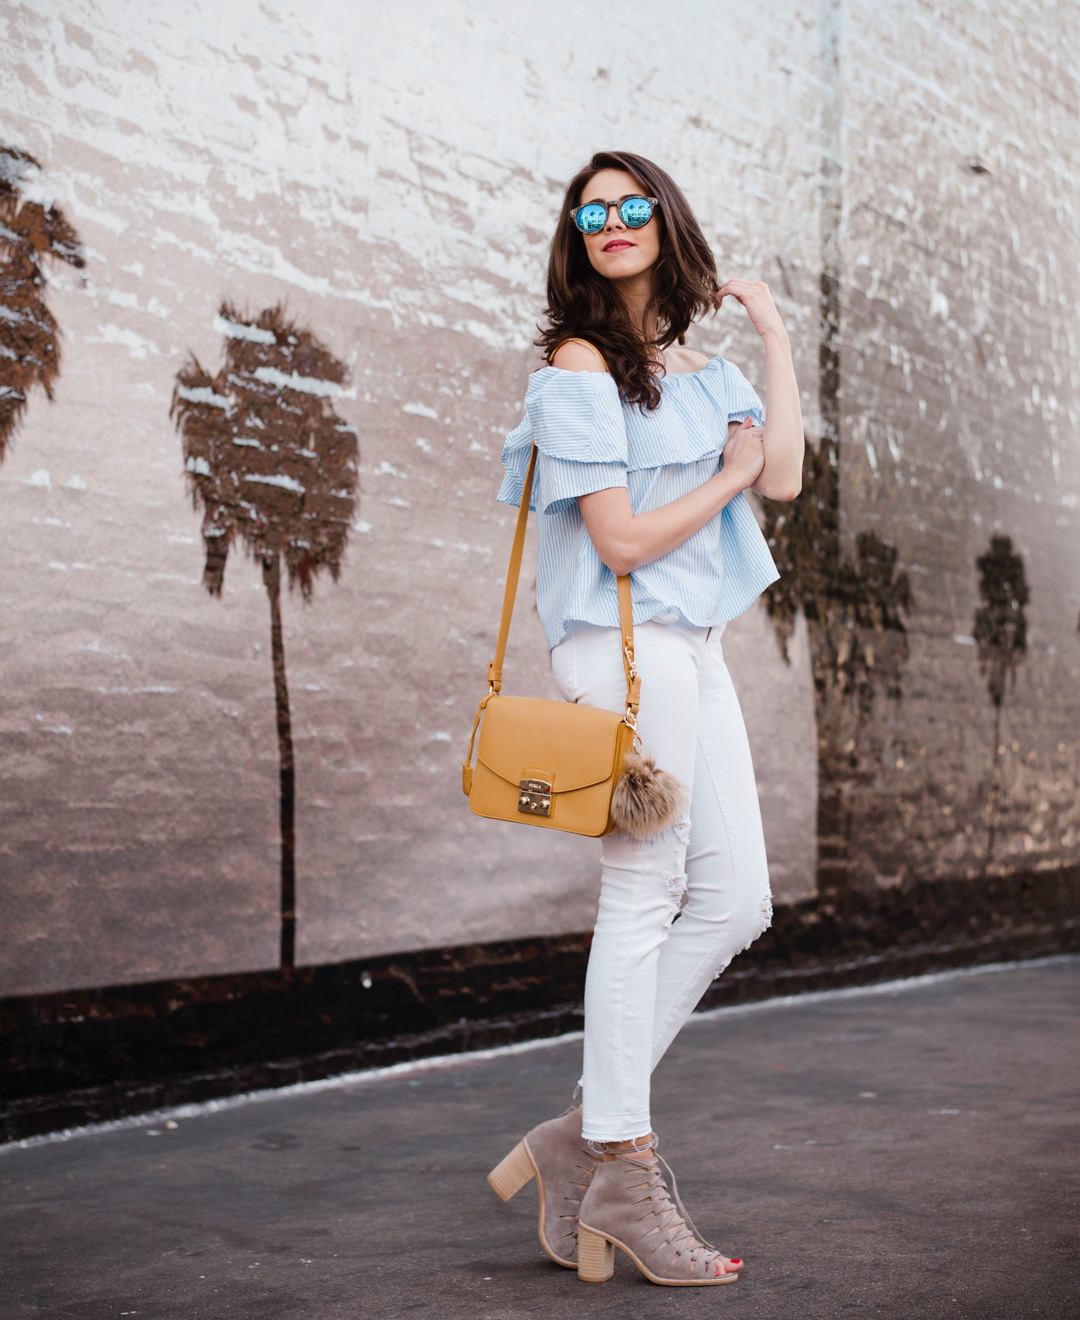 Shein off-the-shoulder top, J Brand Jeans and Taudrey Necklace , Furla bag, Illesteva sunglasses, Jefferey Campbell Shoes.